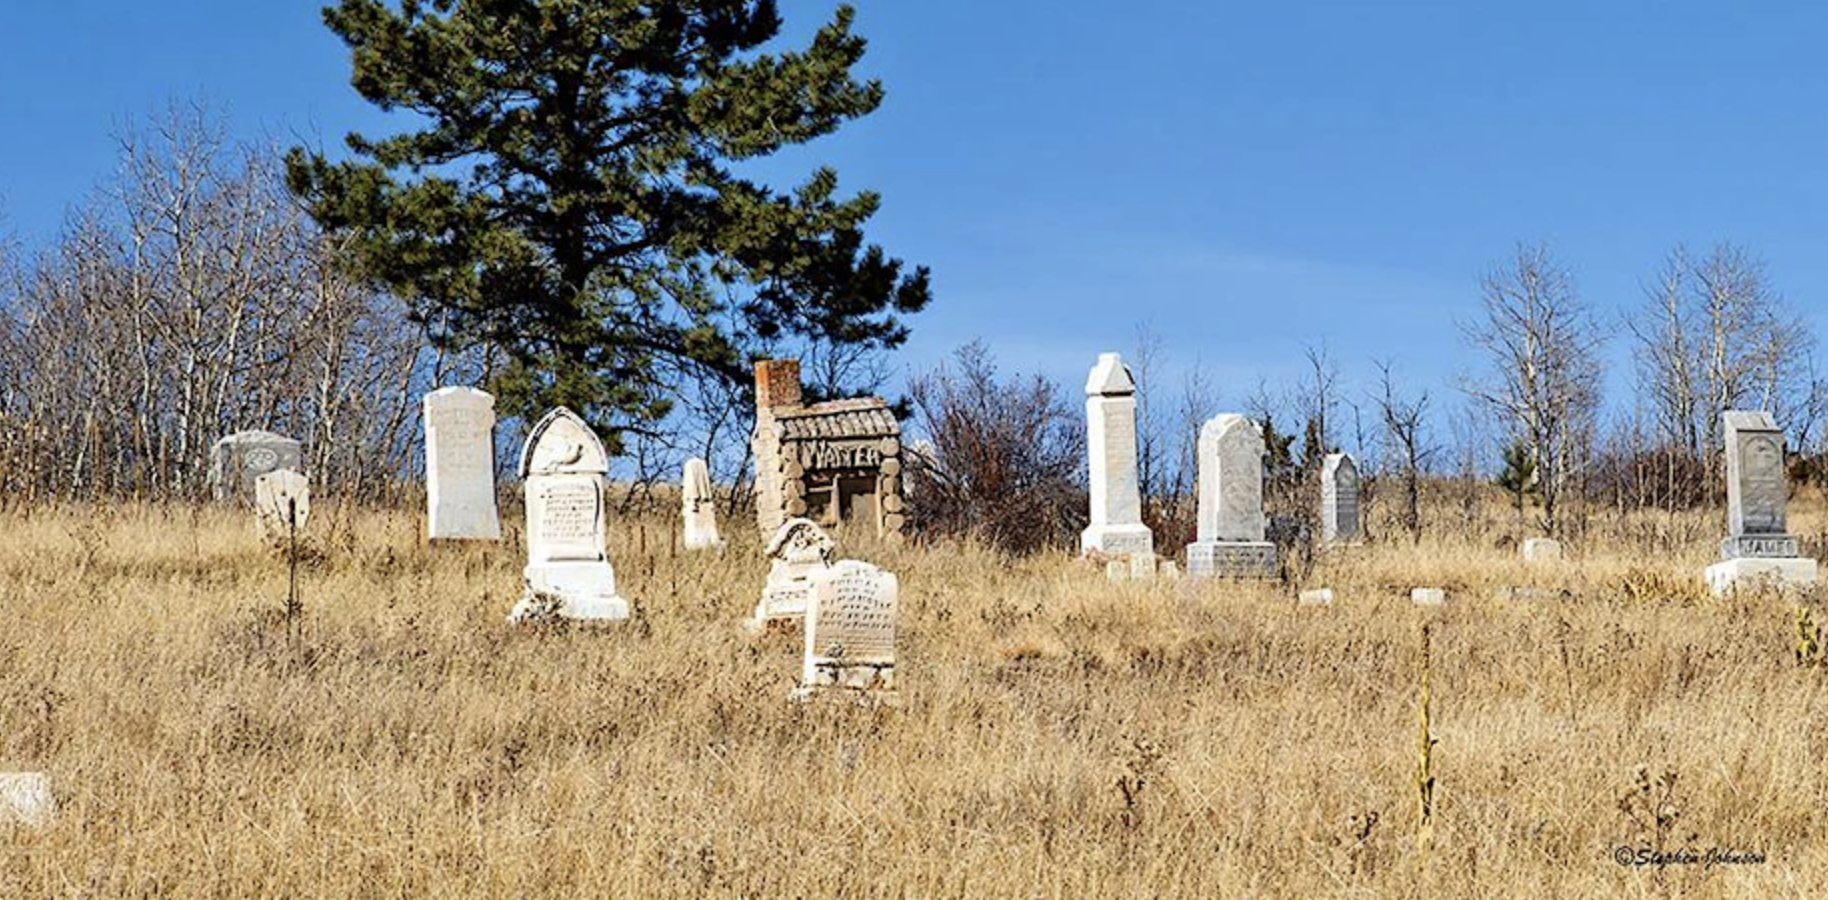 Photograph of a cemetery, with gravestones and a blue sky, with trees in the background. Oddfellows Cemetery, Central City, Colorado, courtesy of Steve Johnson.